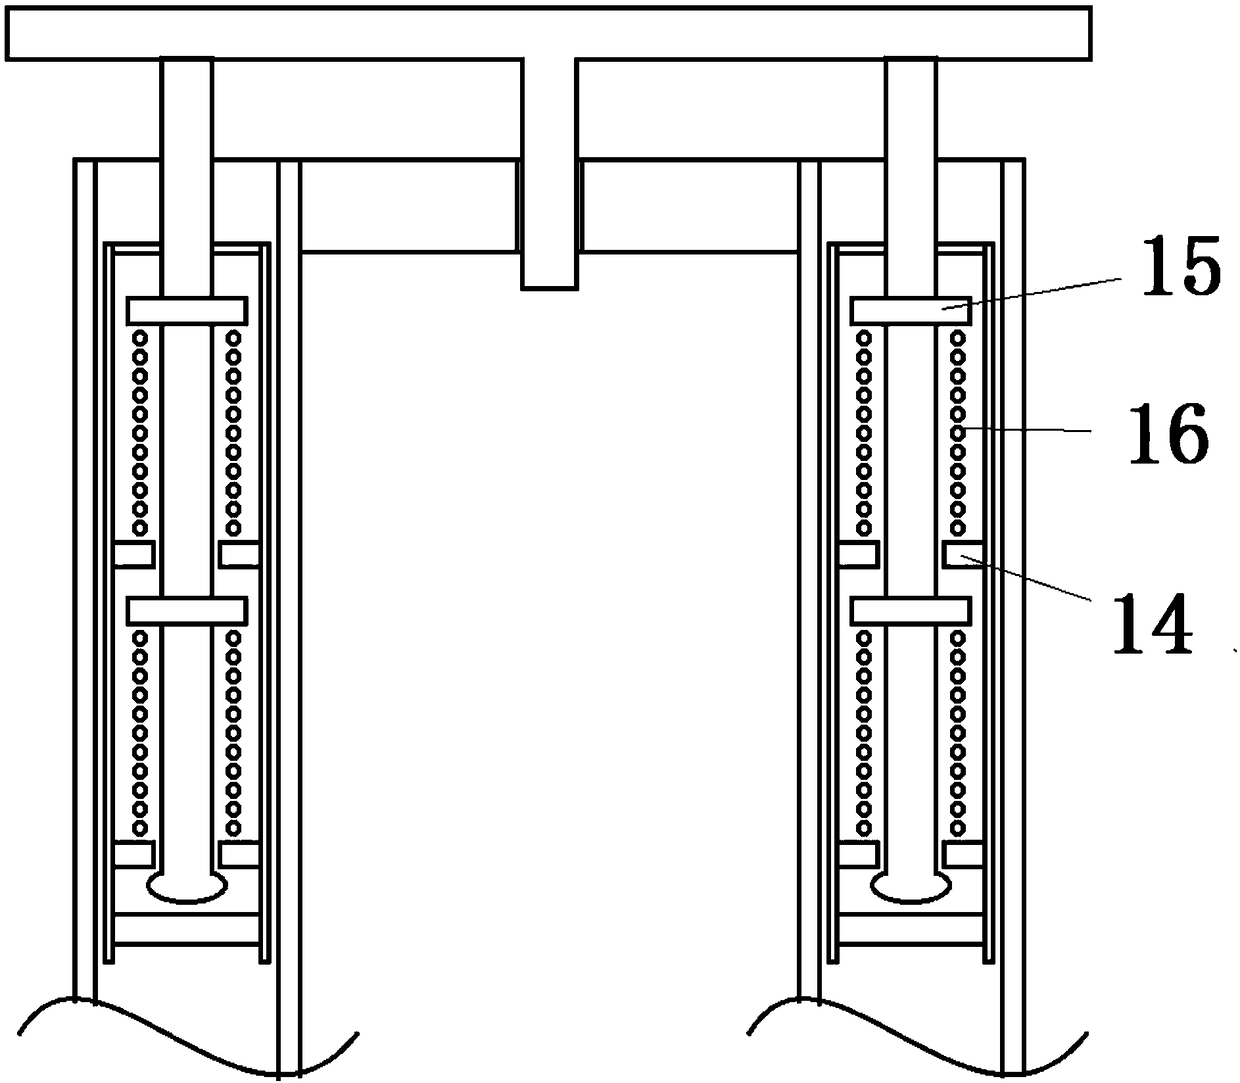 Force transfer damping and anti-collision steel beam for automobile